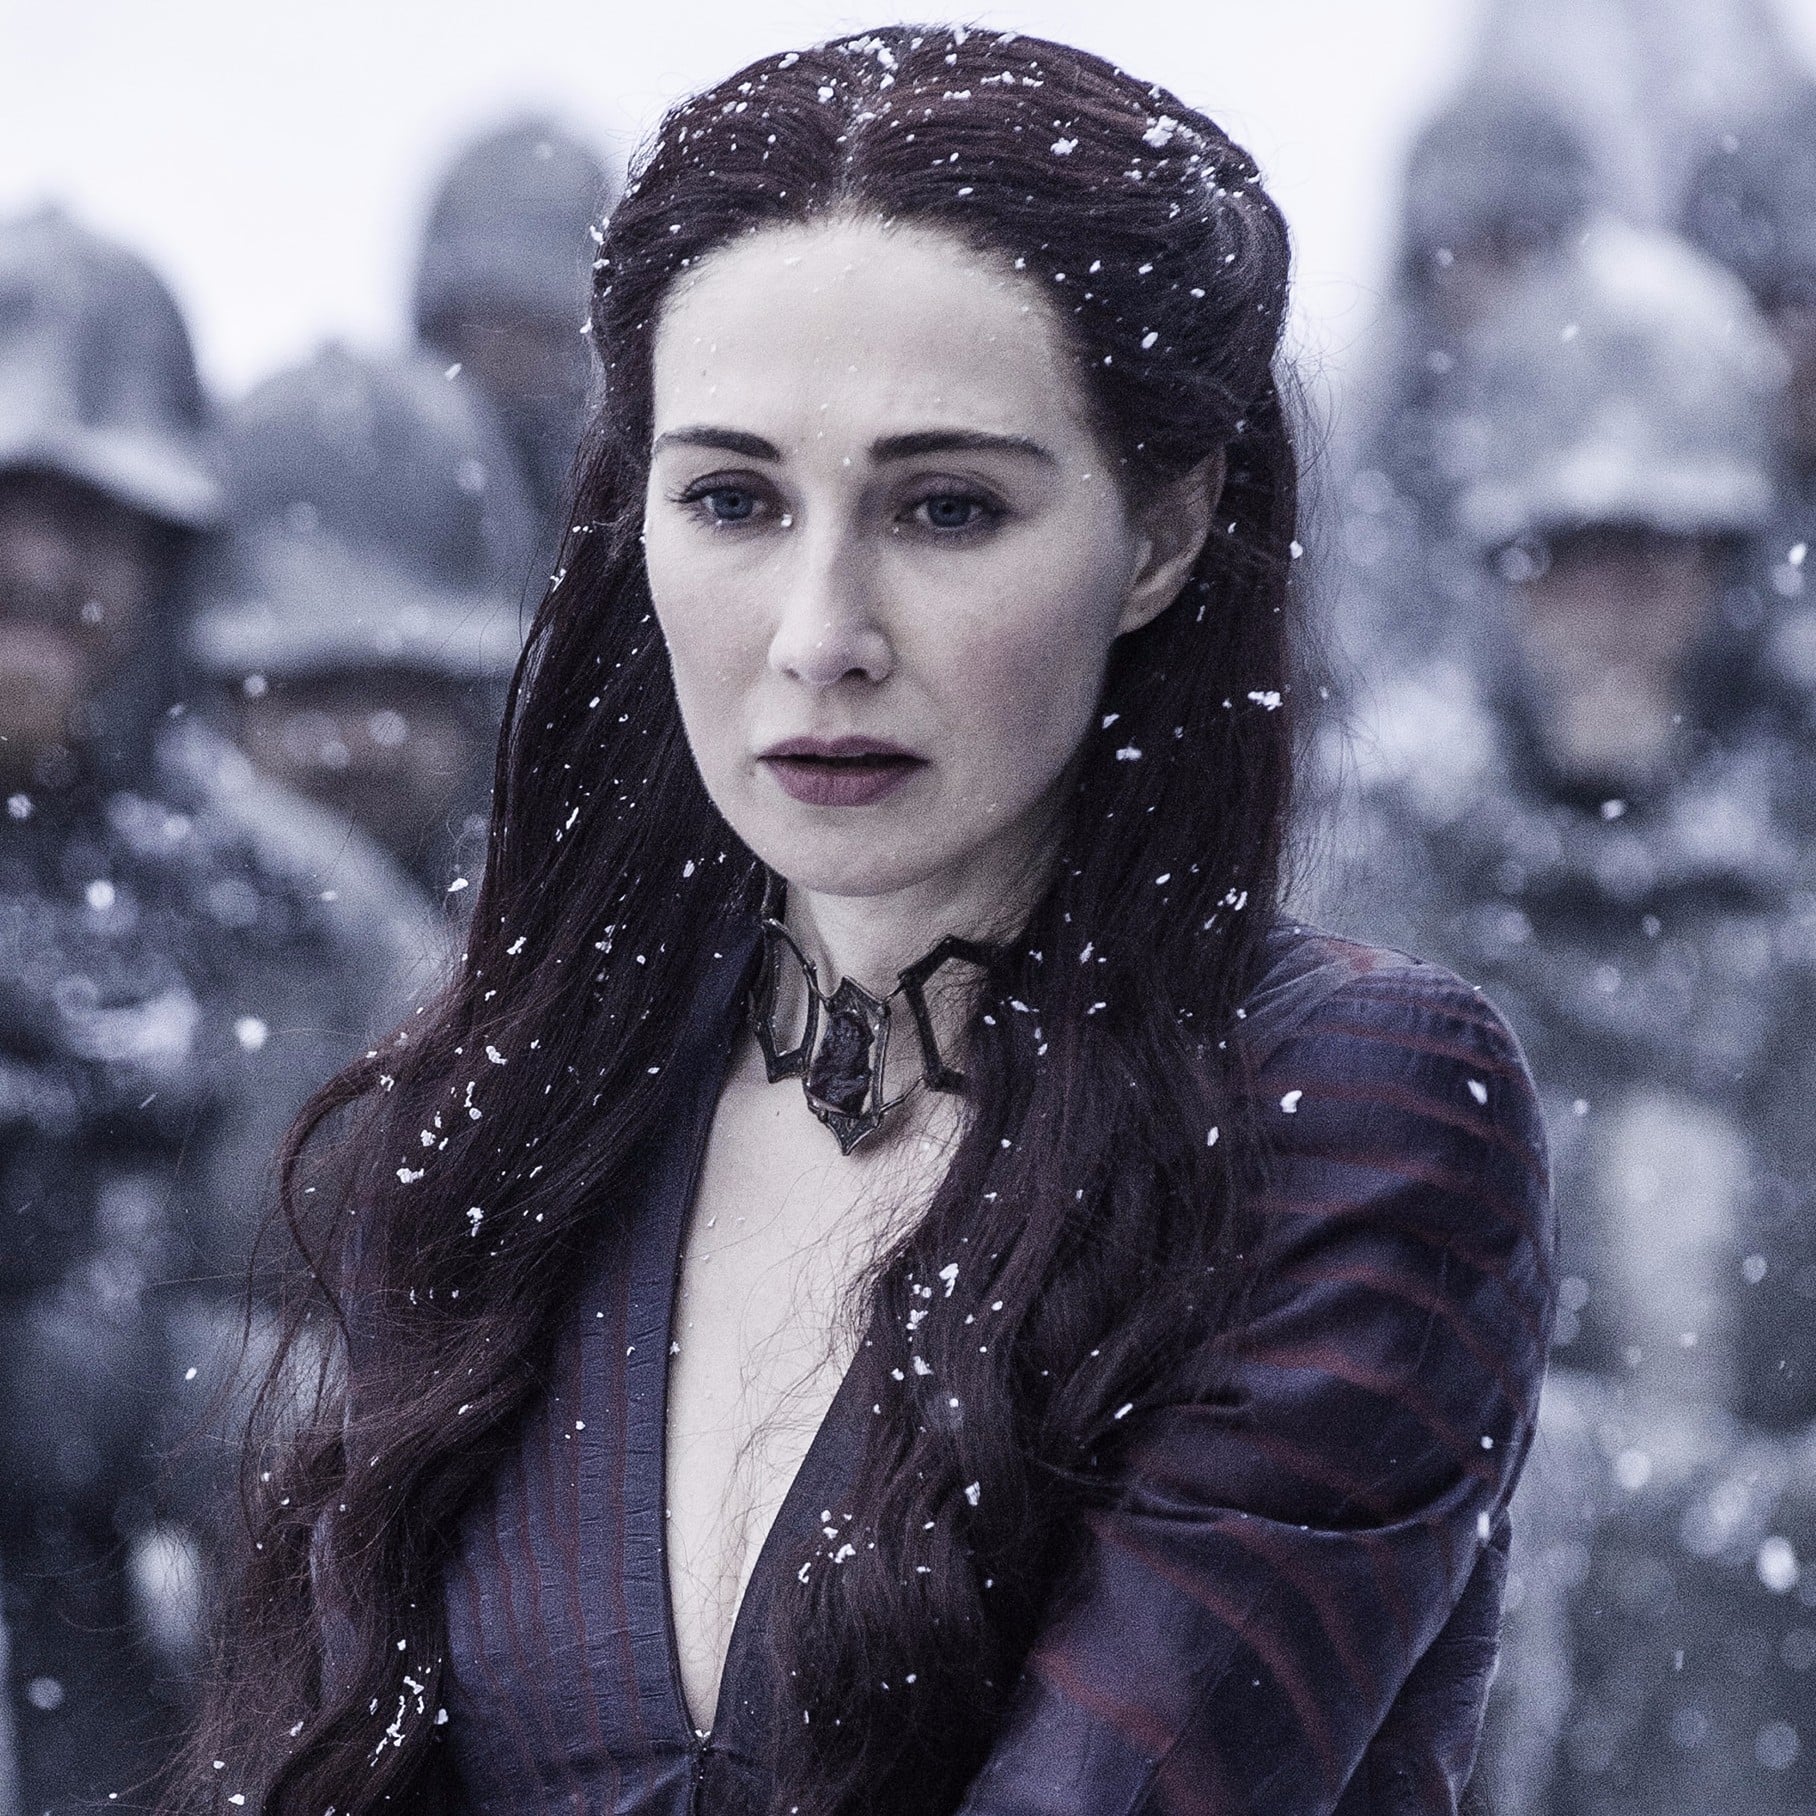 Melisandre: Sometimes sacrifices must be made to ensure victory